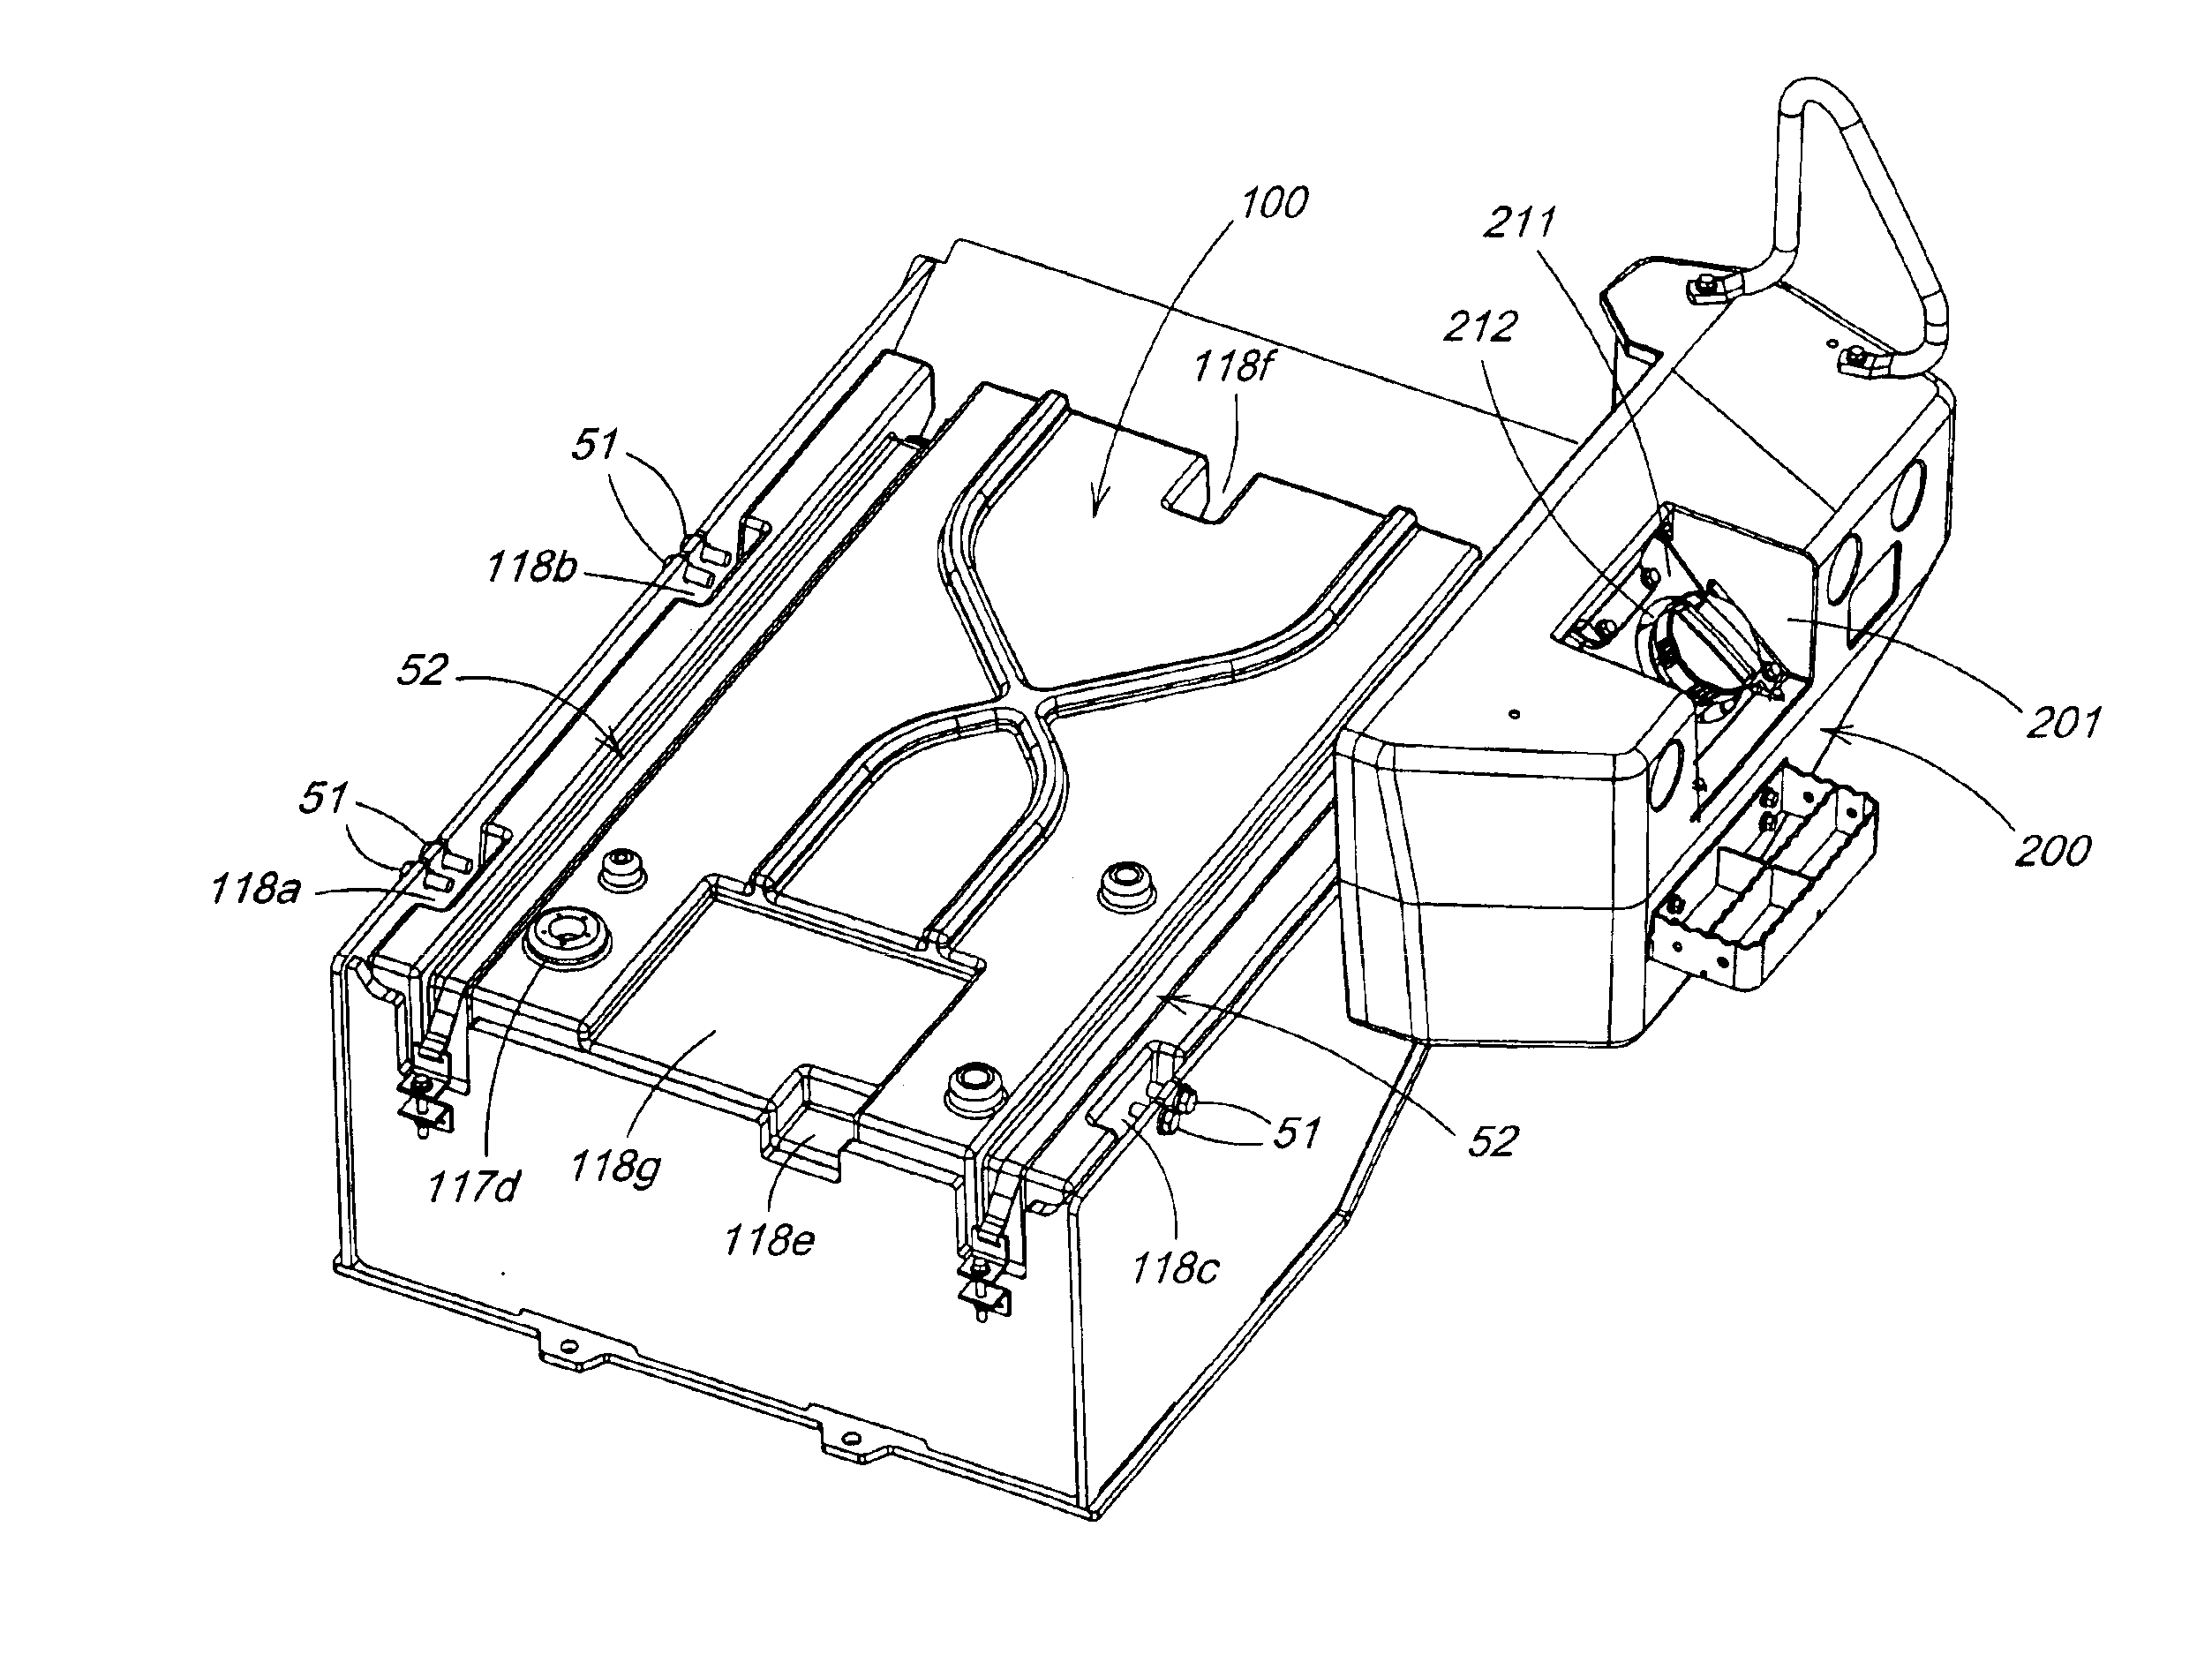 Integrated fuel tank and complementary counterweight